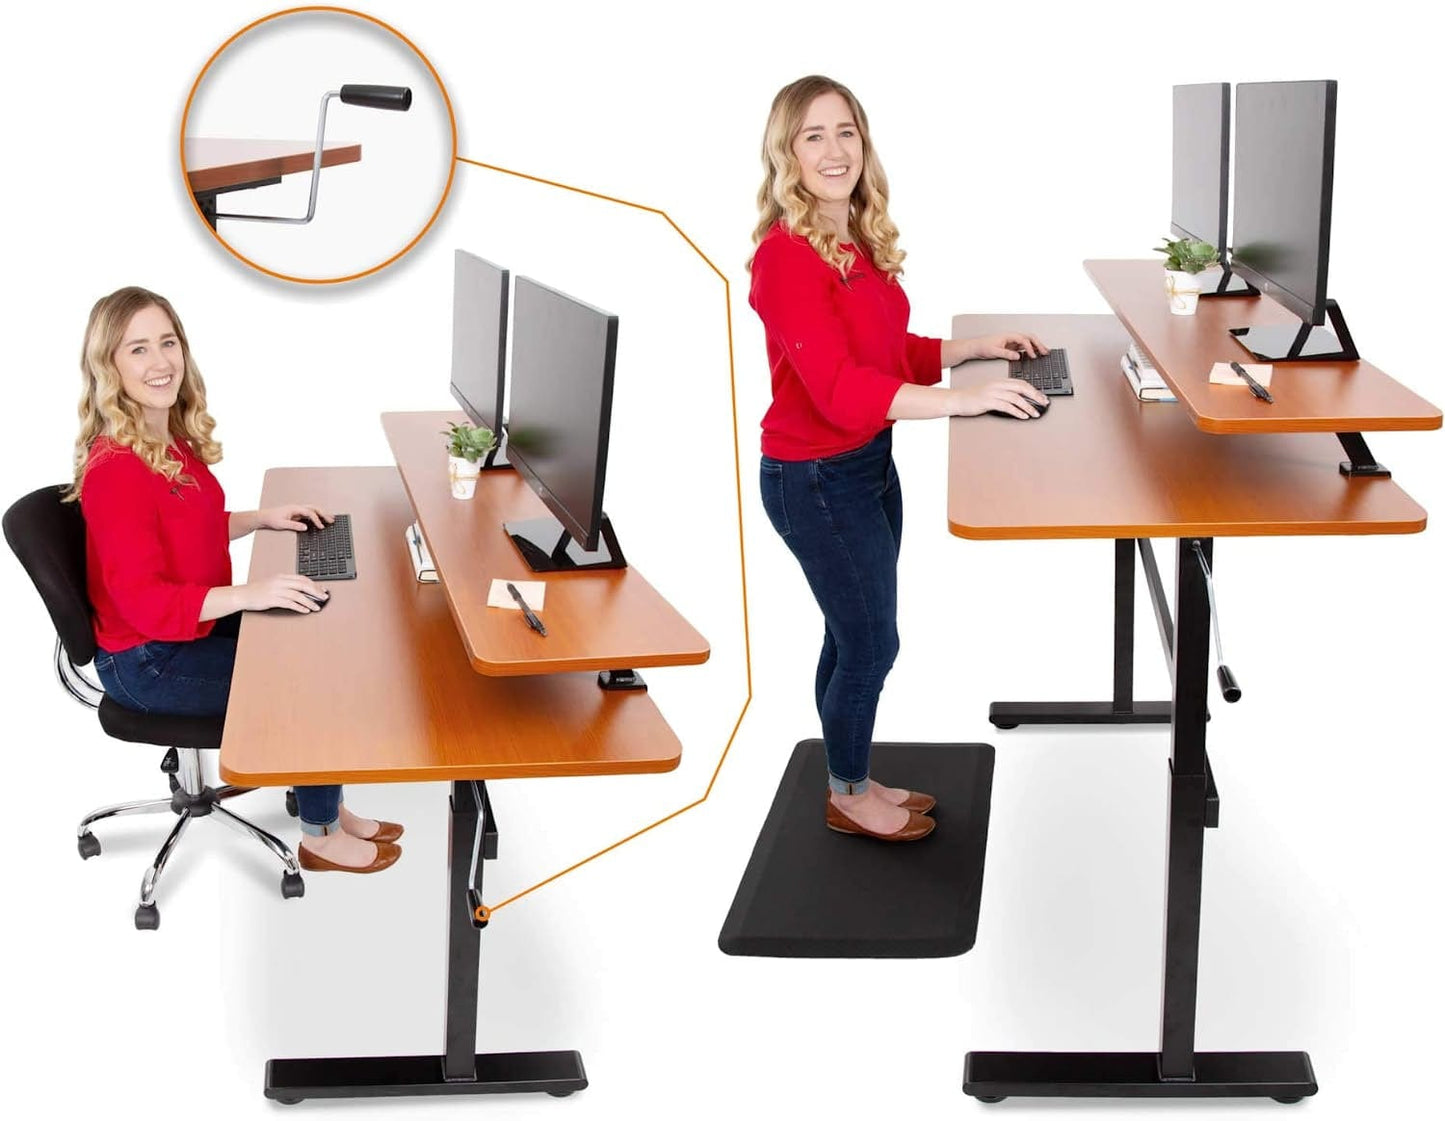 Tranzendesk 55 in Standing Desk with Clamp on Shelf | Crank Manual Height Adjustable Stand up Desk with Attachable Monitor Riser | Holds 3 Monitors & Adds Extra Desk Space (55/Cherry)